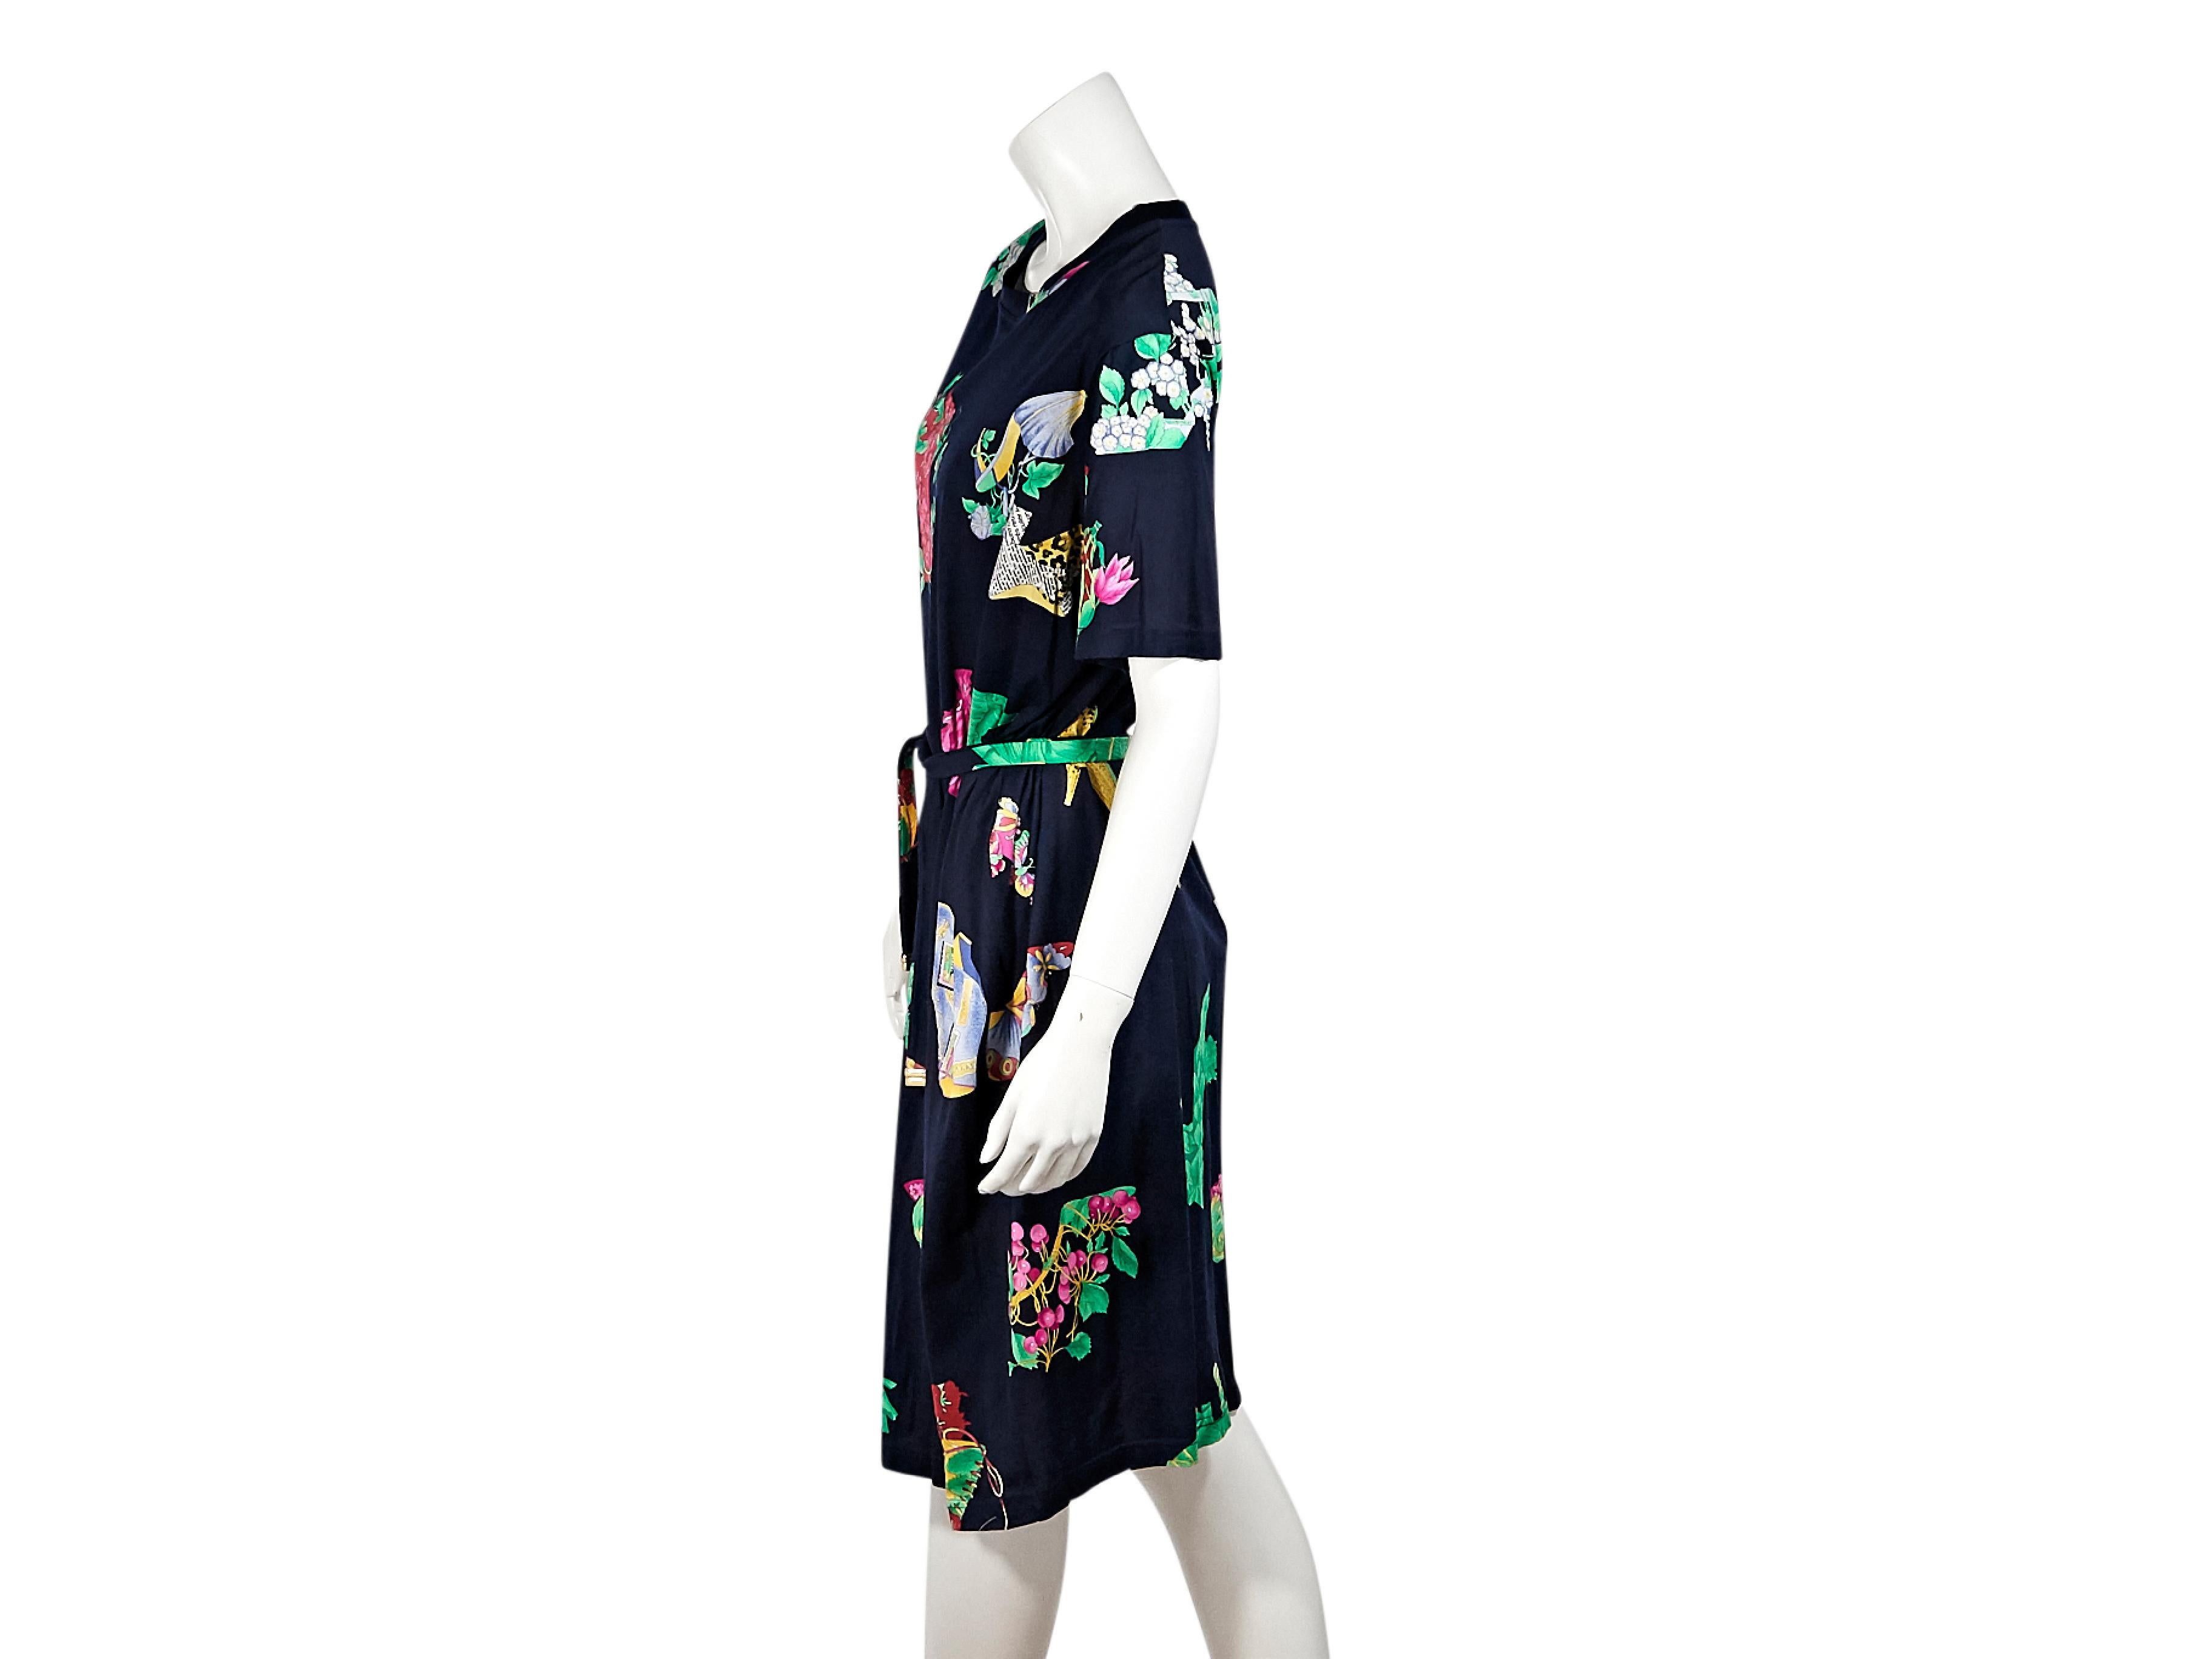 Product details:  Vintage multicolor printed cotton t-shirt dress by Leonard Paris.  Crewneck.  Elbow-length sleeves.  Self-tie belted waist.  Pullover style.  39